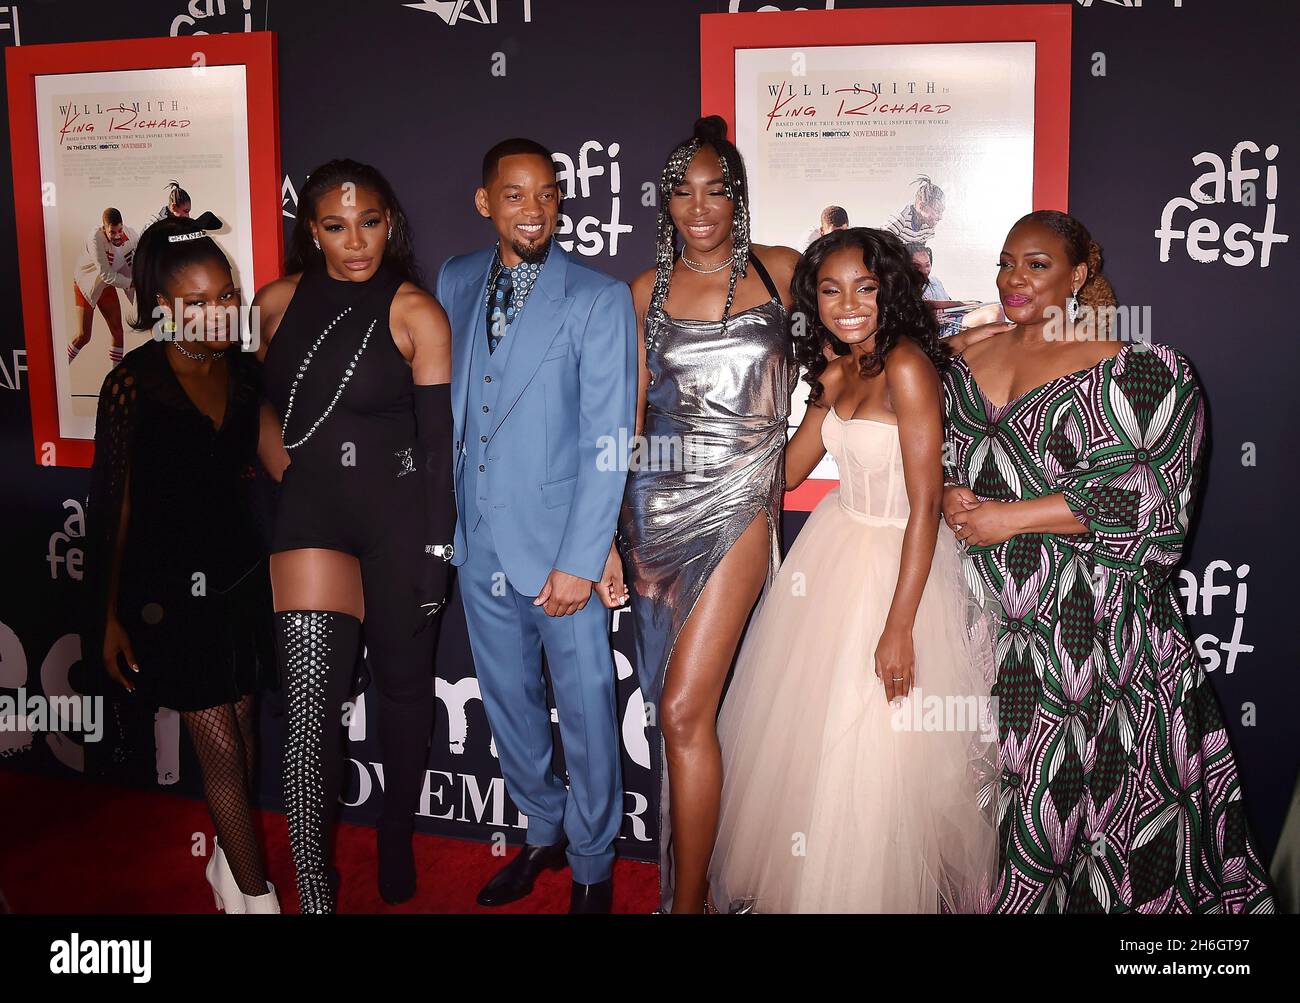 HOLLYWOOD, CA - NOVEMBER 14:  (L-R) Demi Singleton, Serena Williams, Will Smith, Venus Williams, Saniyya Sidney and Aunjanue Ellis attend the 2021 AFI Fest Closing Night Premiere of Warner Bros. 'King Richard' at TCL Chinese Theatre on November 14, 2021 in Hollywood, California.                                                                         ; ' Stock Photo